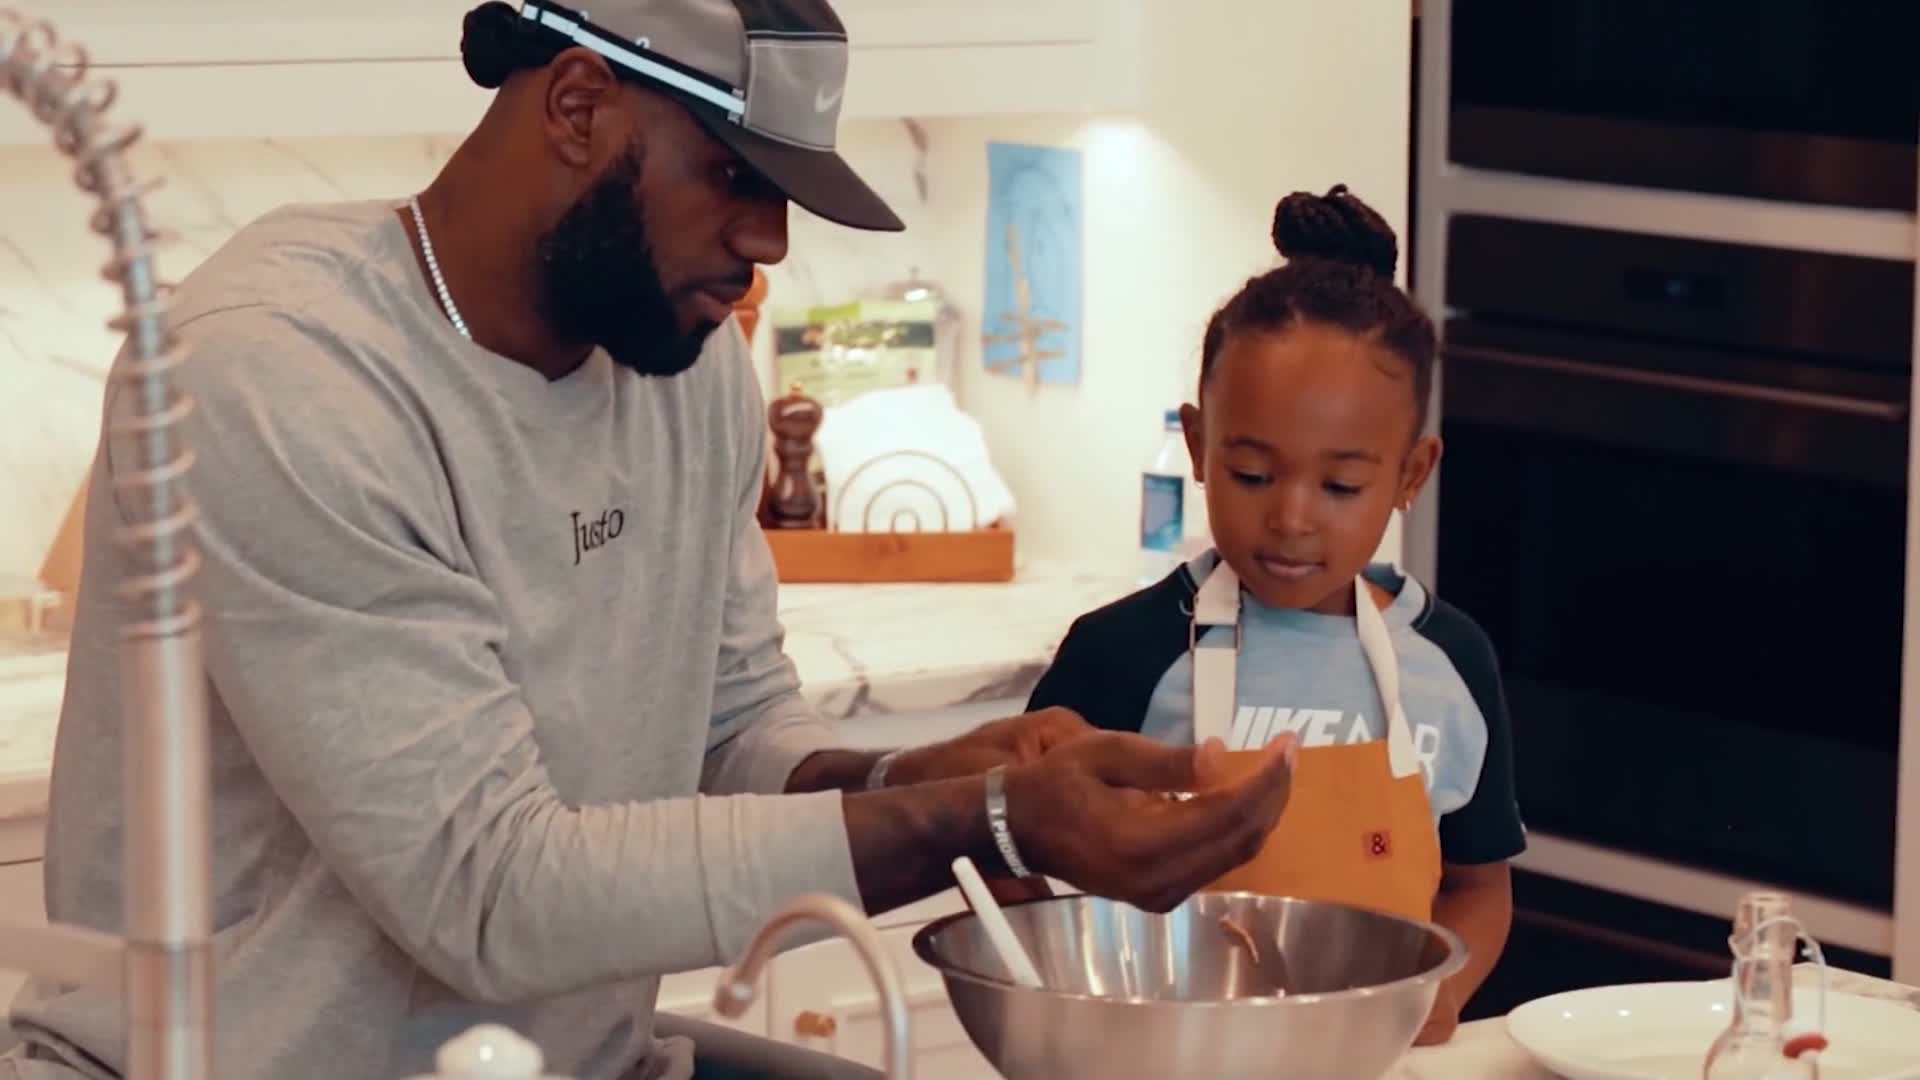 LeBron James plays sous-chef for 5-year-old daughter Zhuri on her YouTube show | CNN